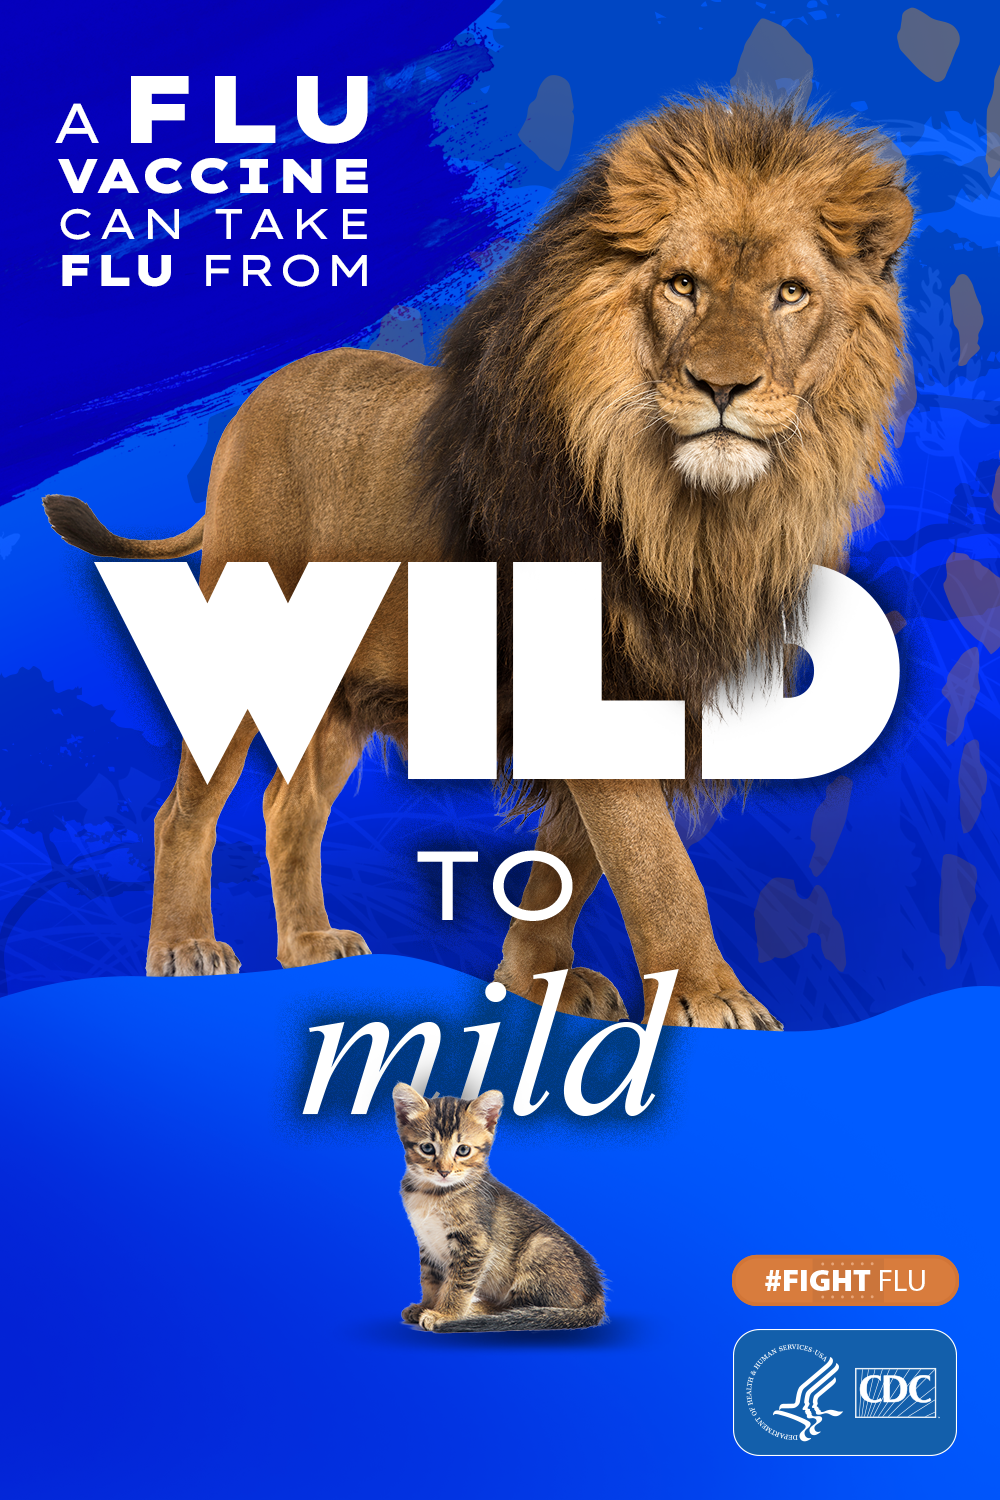 Photos of a lion and a kitten with text, "A flu vaccine can take flu from wild to mild."